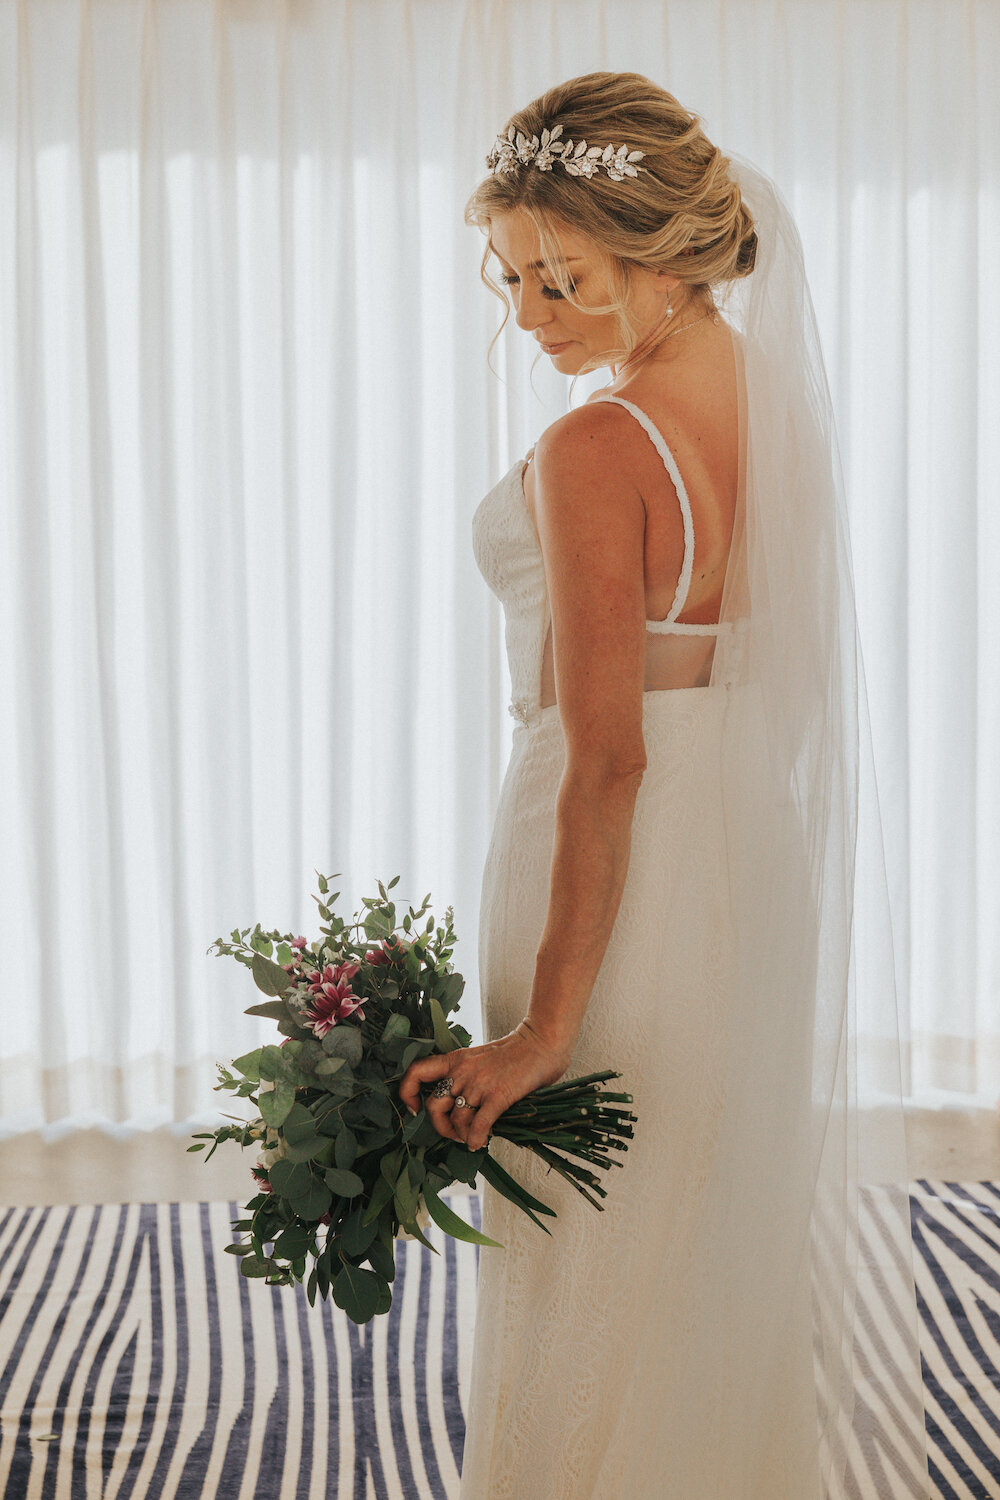 Amanda wore the Ivy gown by Savrina Tavra